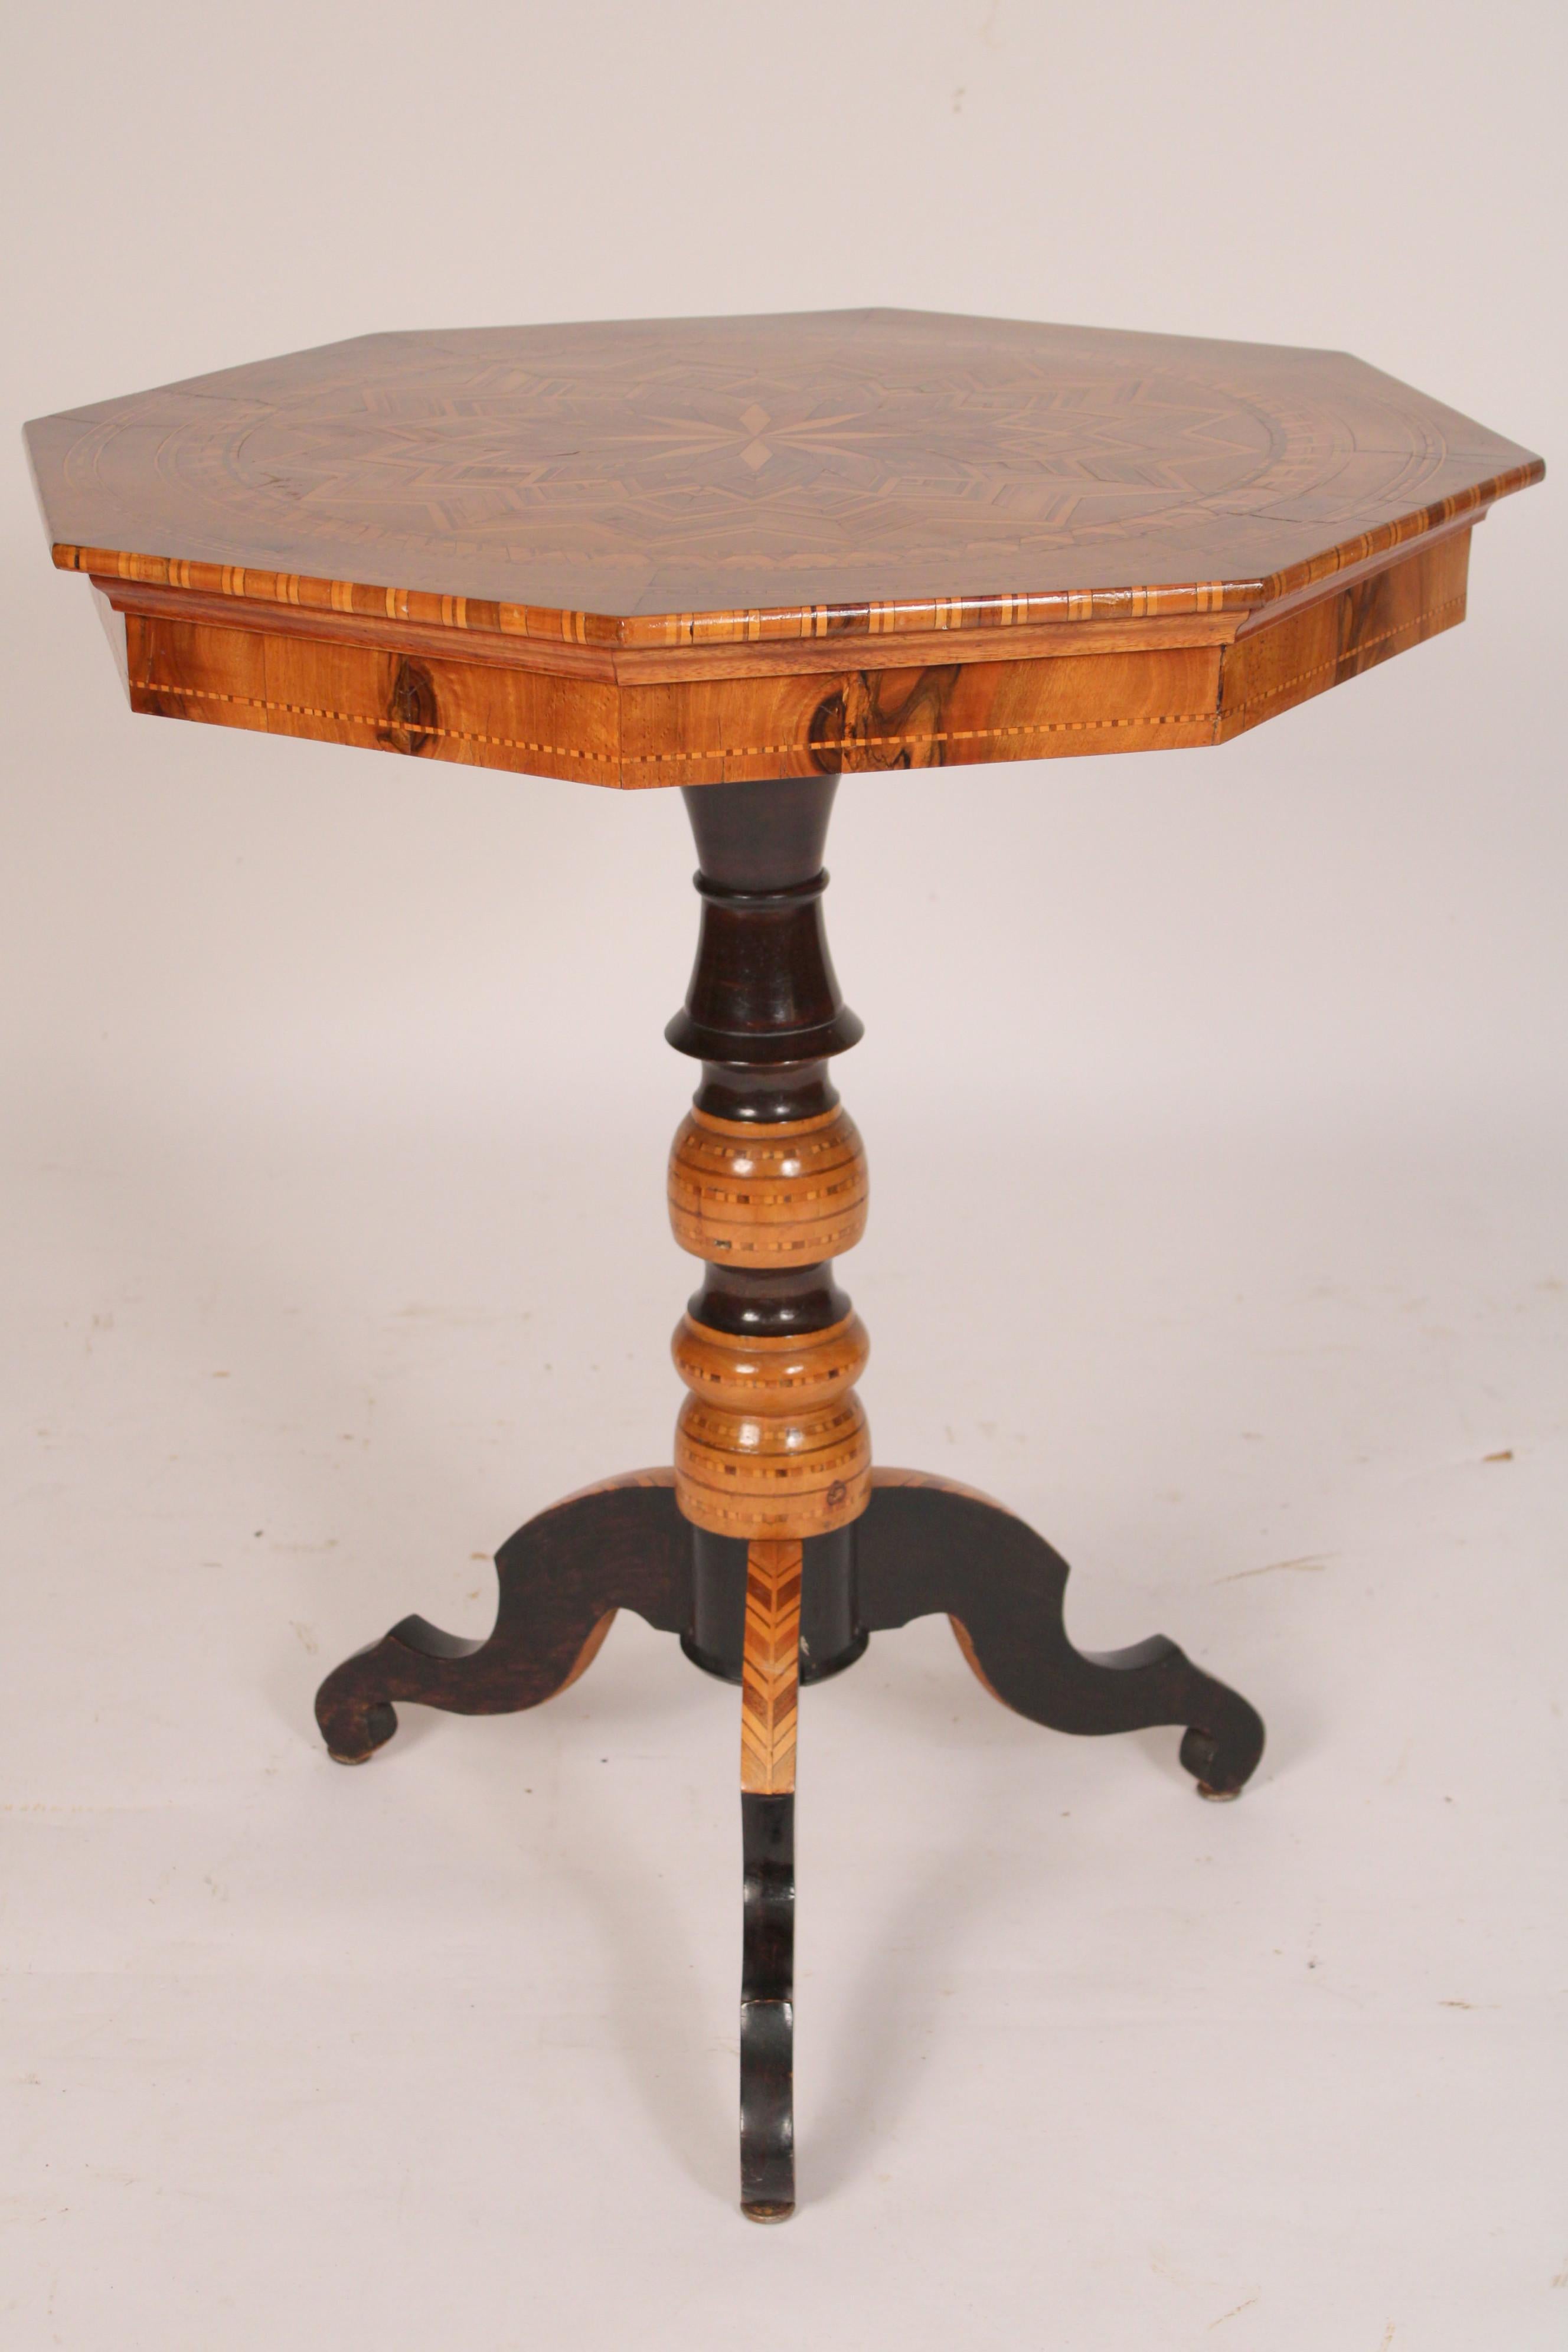 Italian inlaid octagonal shaped occasional table, circa 1930's. With a octagonal shaped top with exotic wood inlays, including birch, rose wood, fruitwood and approximately 3 or 4 more type of woods, a turned pedestal with black lacquer and wood